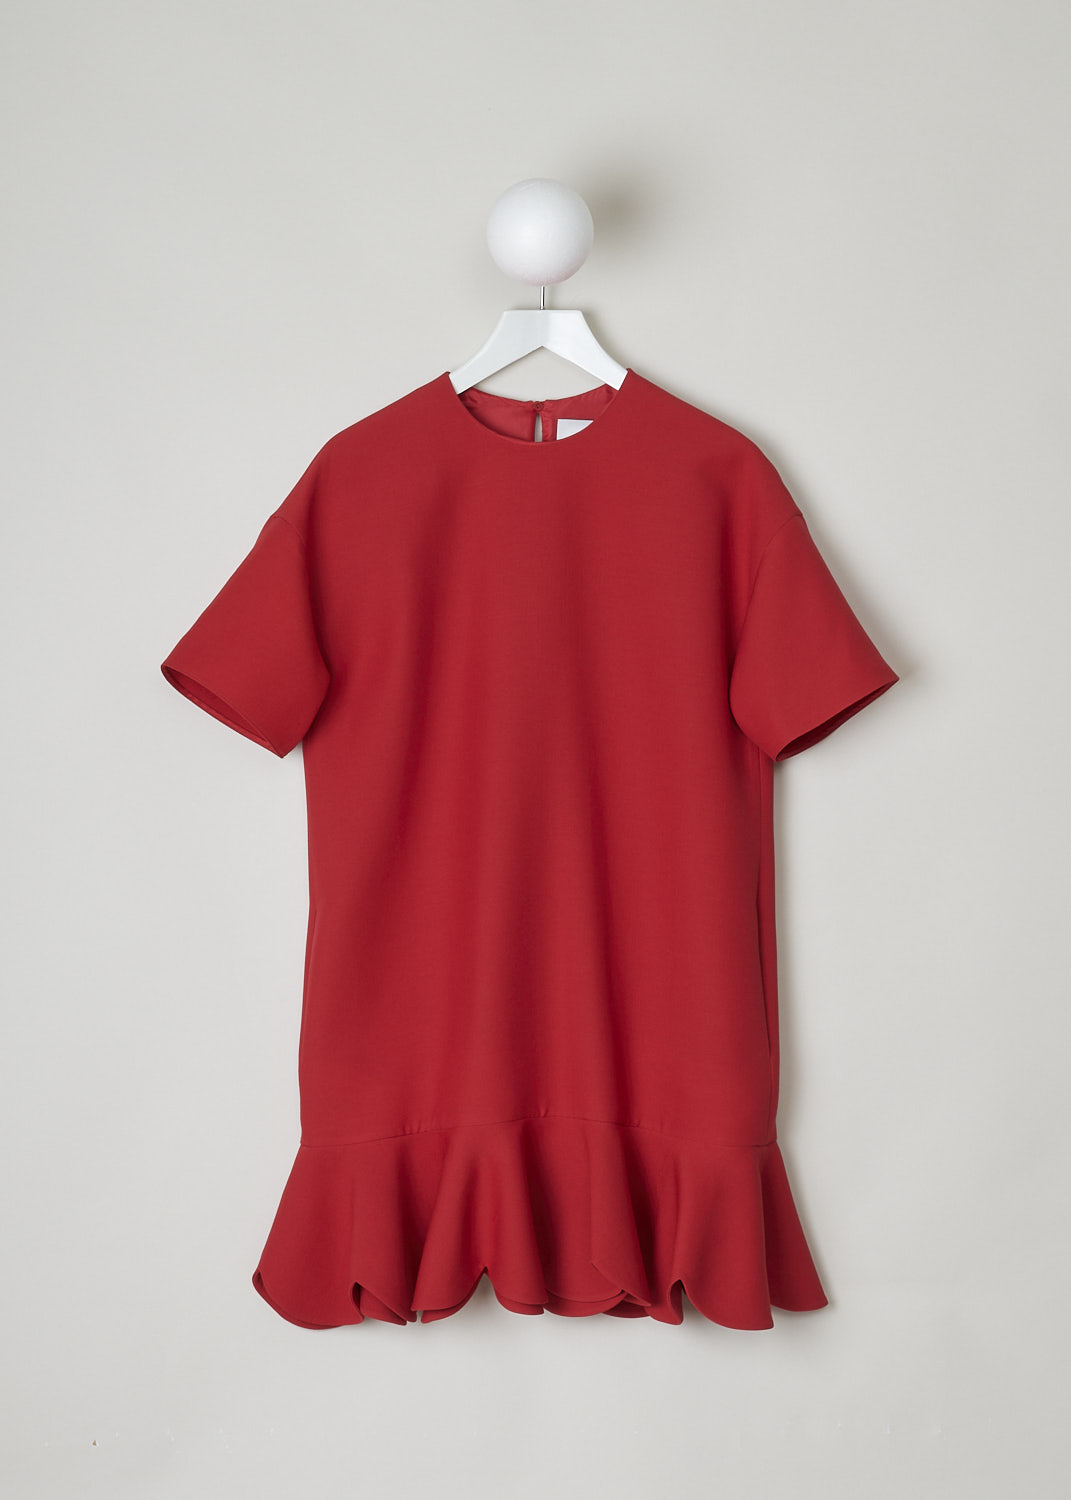 VALENTINO, RED SHORT SLEEVE DRESS WITH RUFFLES, SB3VAMV41CF_157, Red, Front, This red dress has a round neckline, short sleeves and a ruffed hemline. Slanted pockets can be found concealed within the seam. The dress has a wider silhouette. In the back, a single button functions as the closure option. 
